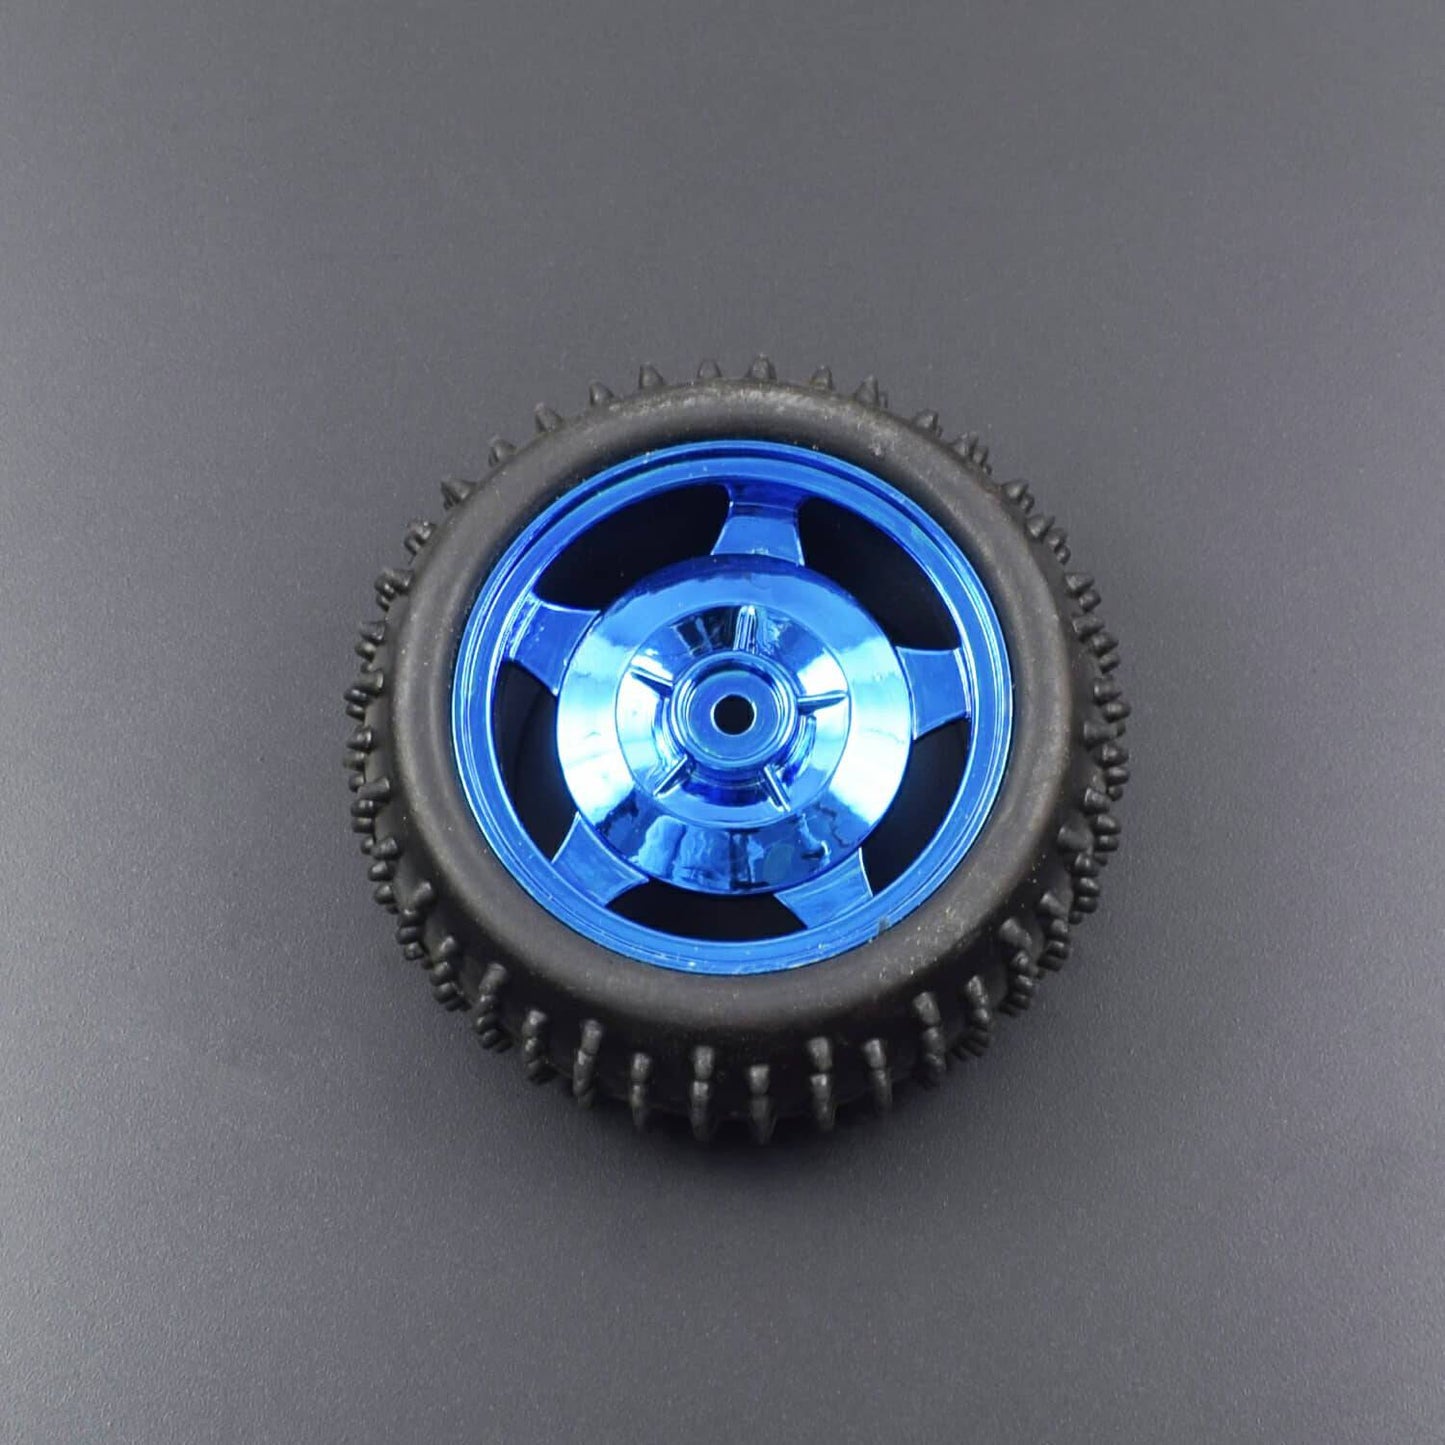 85MM Large Robot Smart Car Wheel for Arduino robot 38MM Width Surface - Blue-RS1971 - REES52